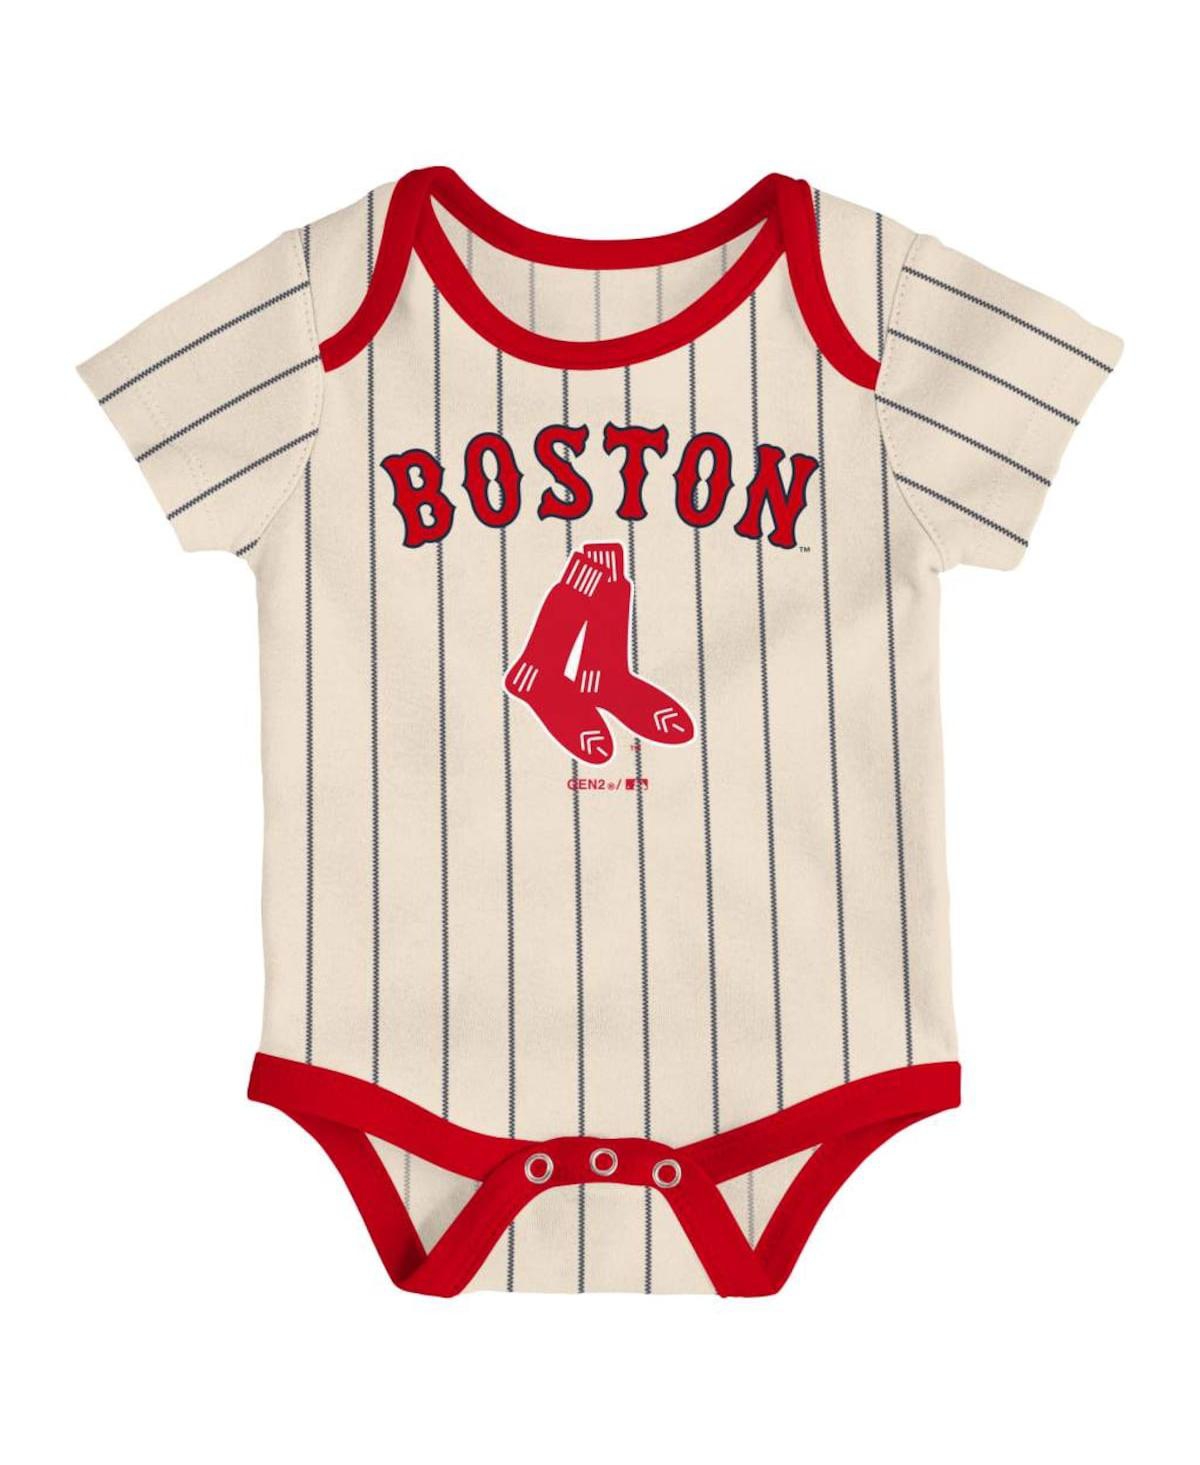 Shop Outerstuff Unisex Infant Navy And Red And Cream Boston Red Sox Future 1 3-pack Bodysuit Set In Navy,red,cream